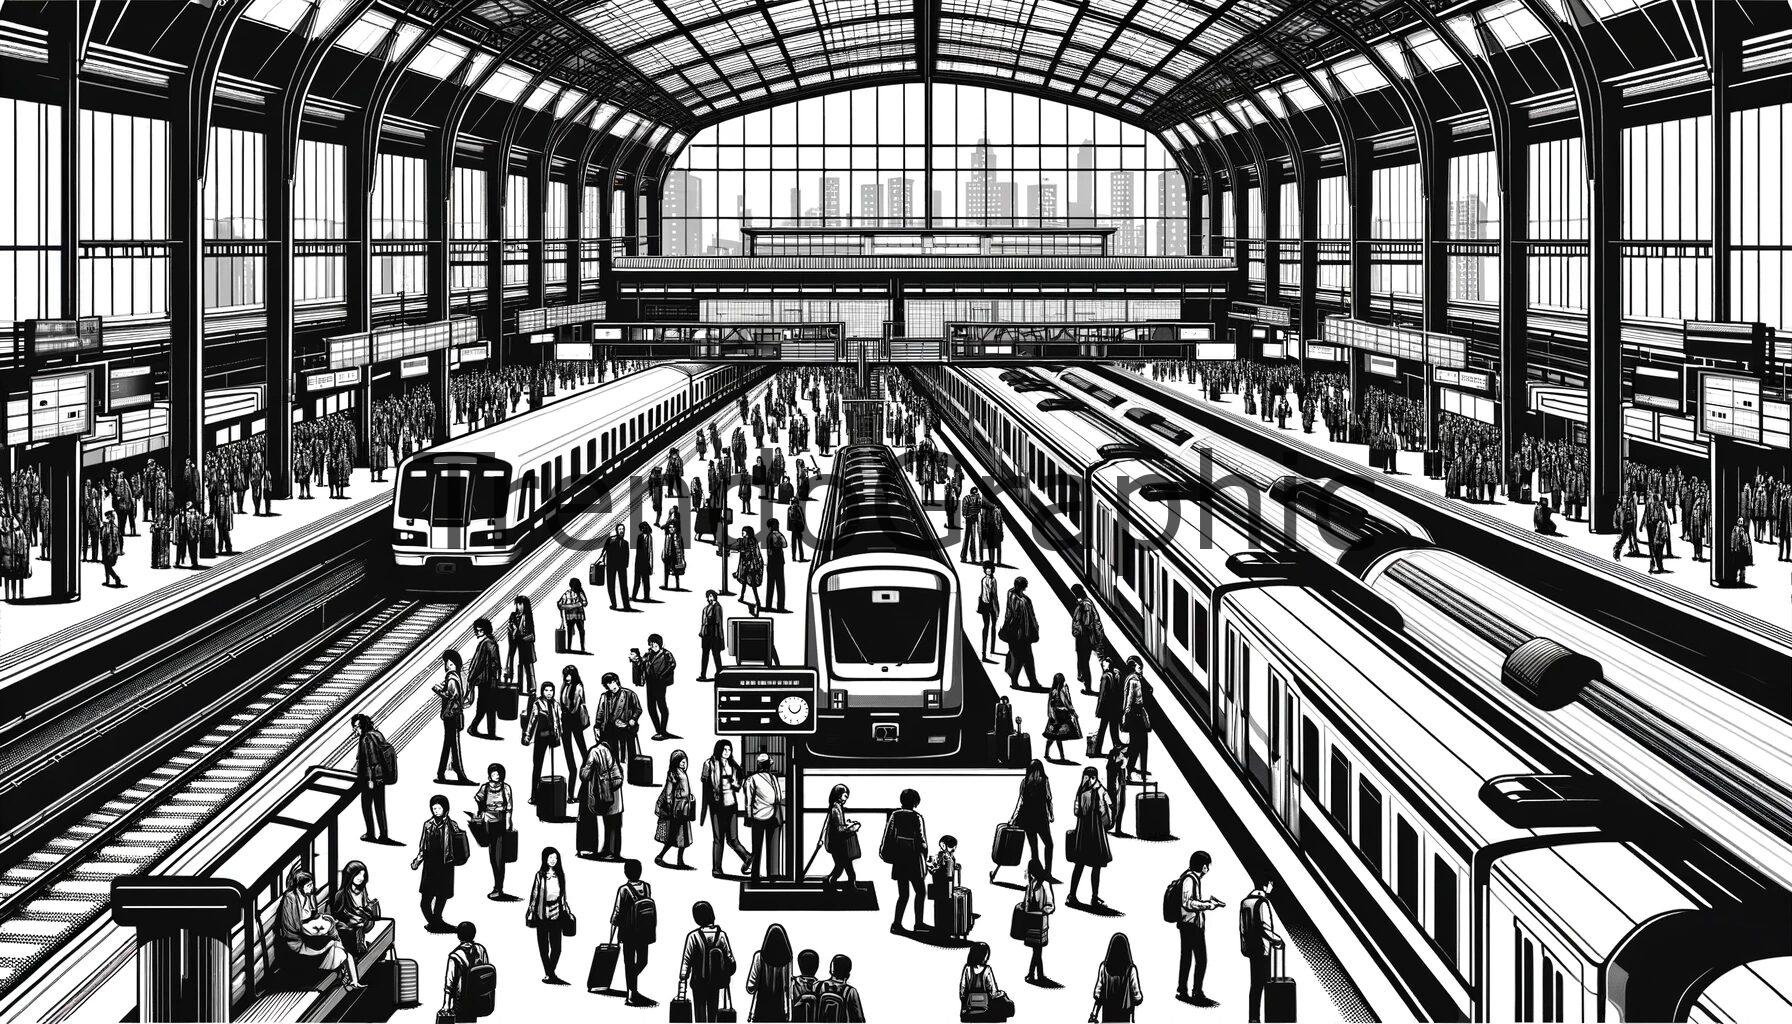 Captivating Scene of a Crowded Train Station in Monochrome